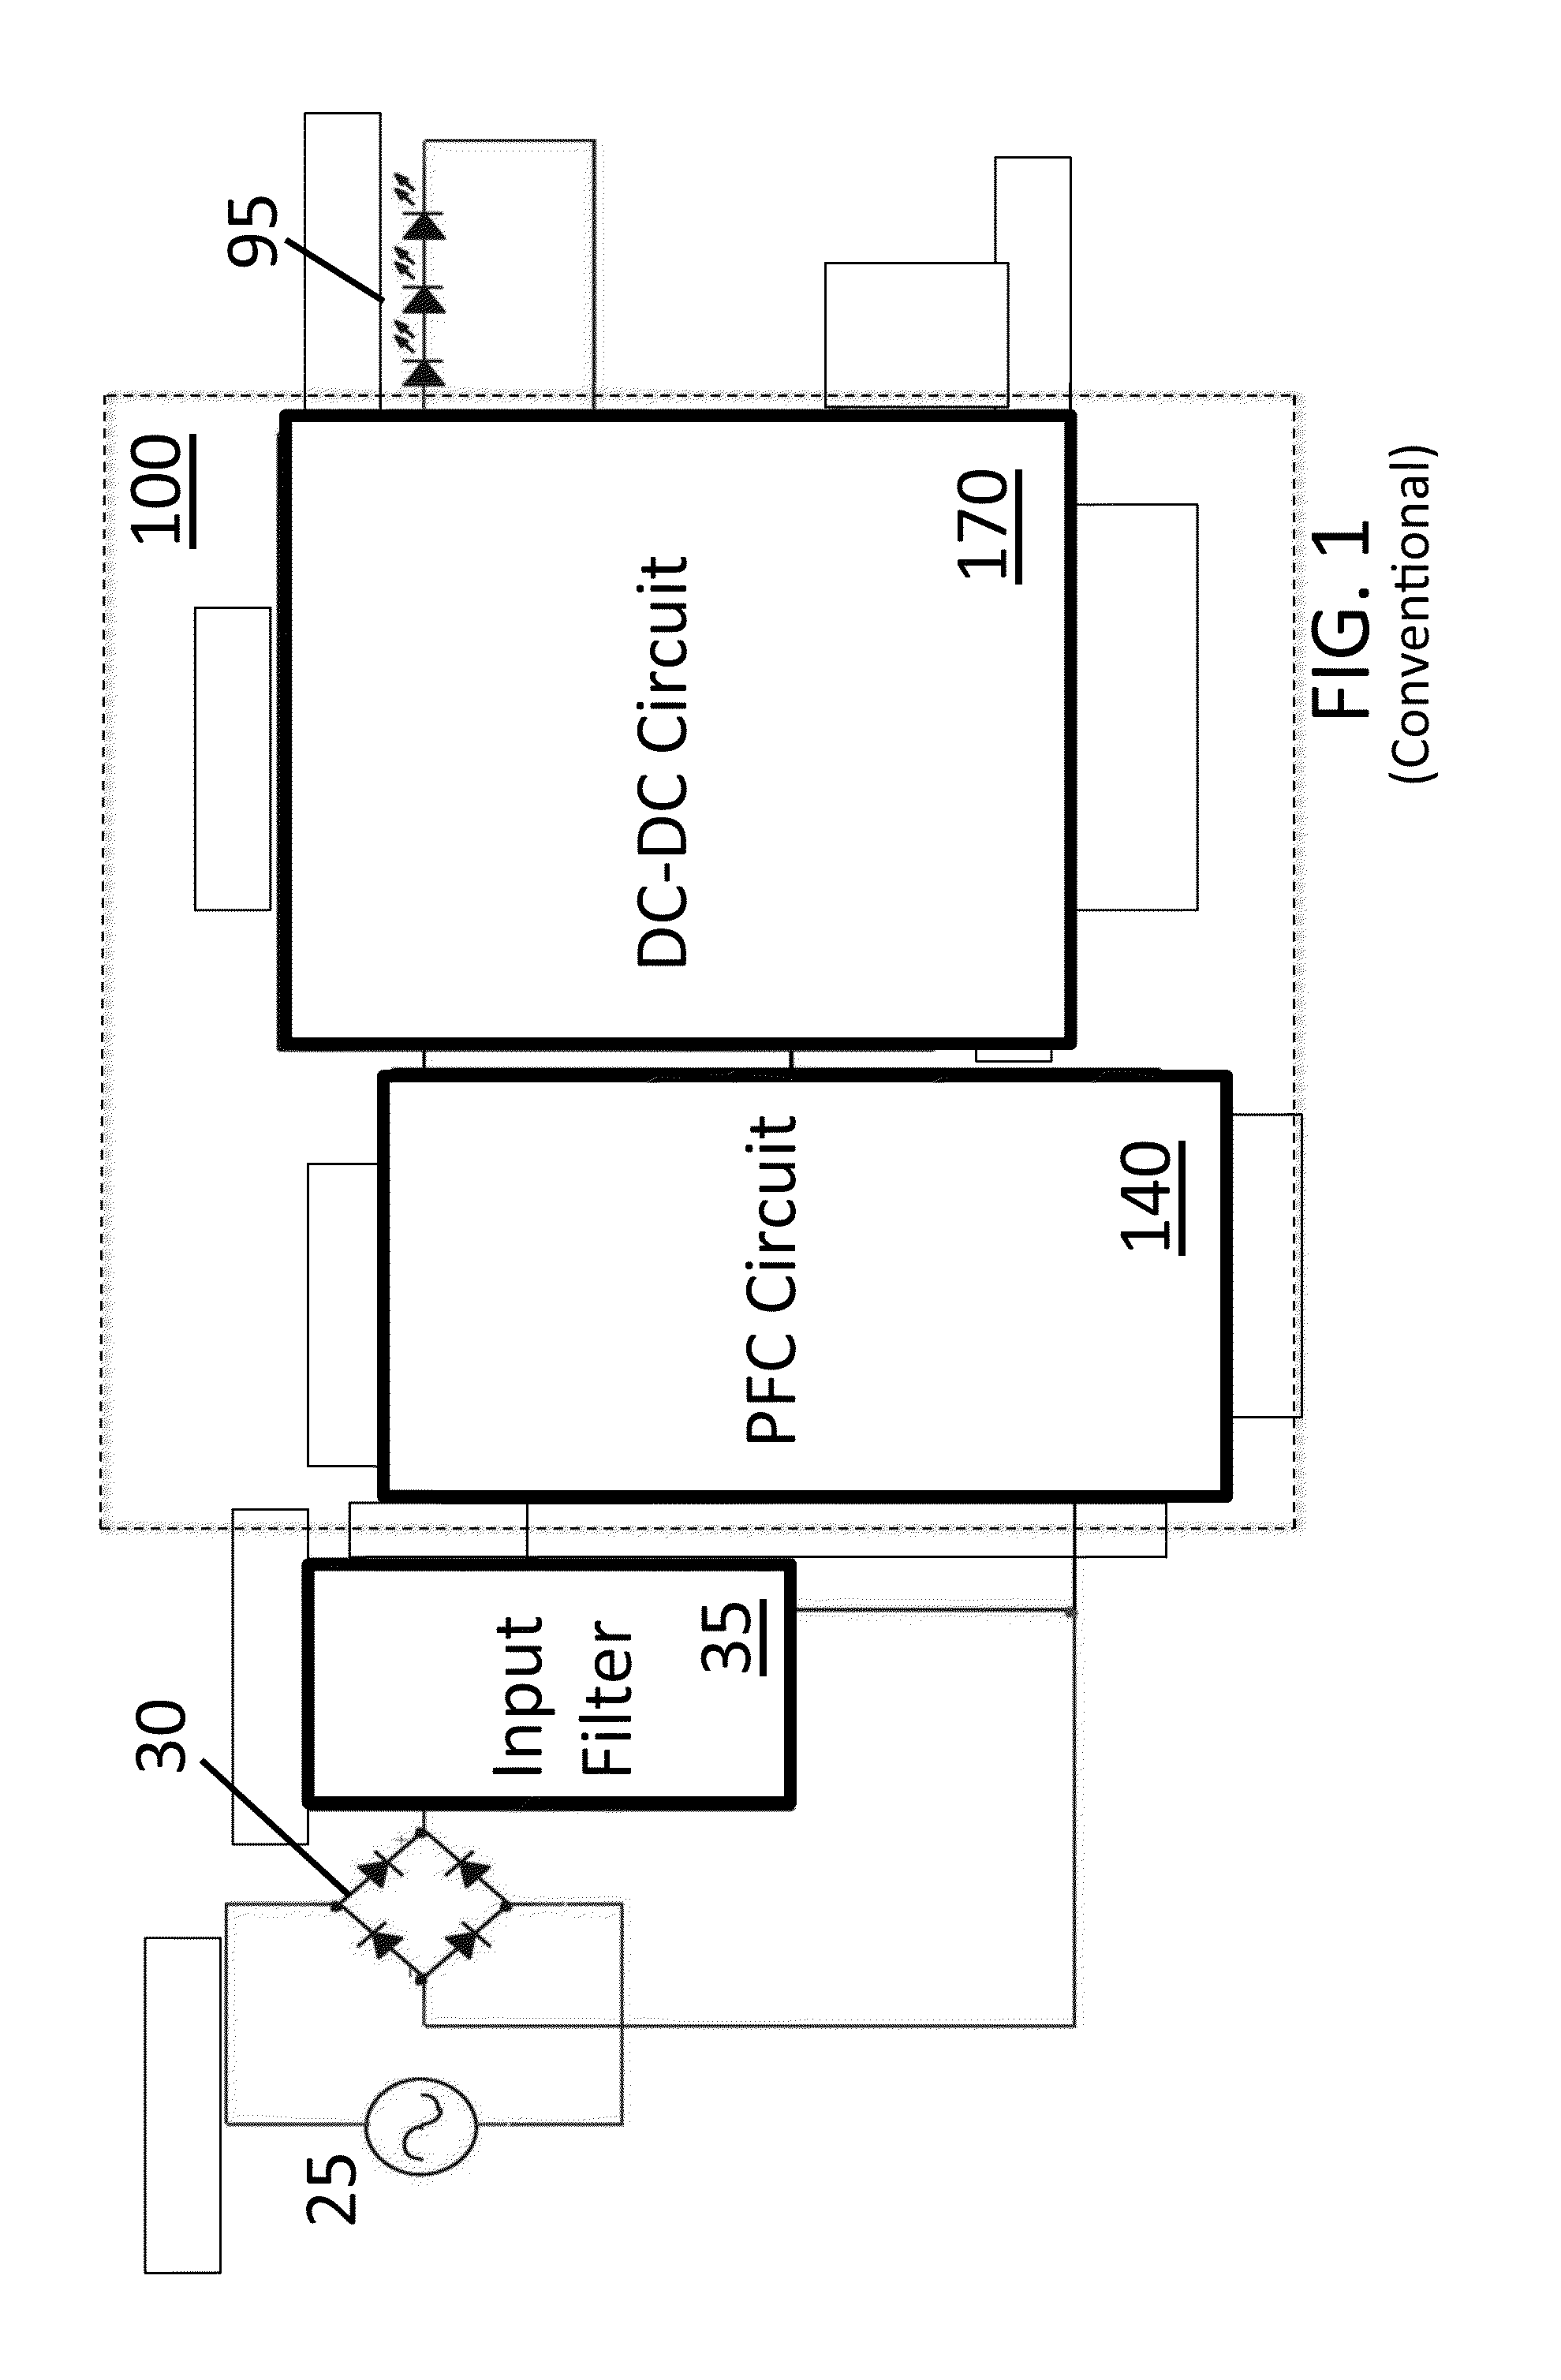 Single-stage ac-dc power converter with flyback pfc and selectable dual output current